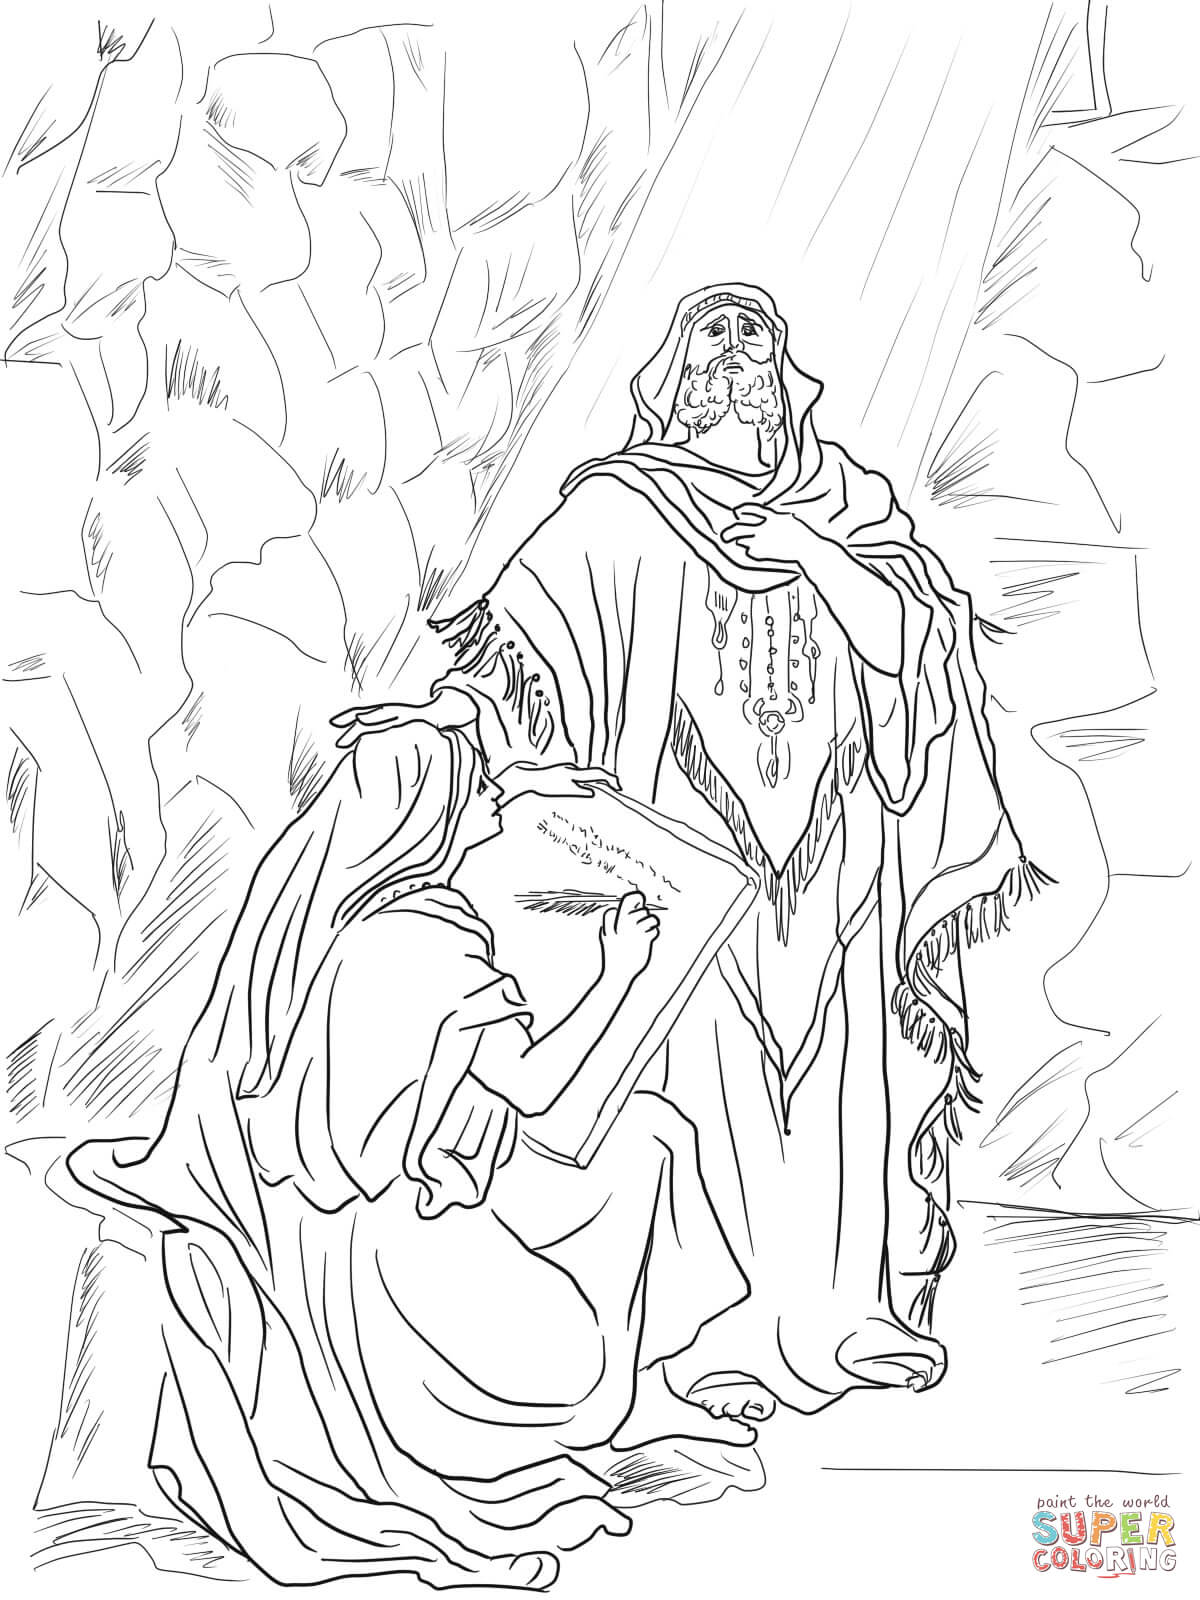 Prophet Jeremiah coloring pages | Free Coloring Pages